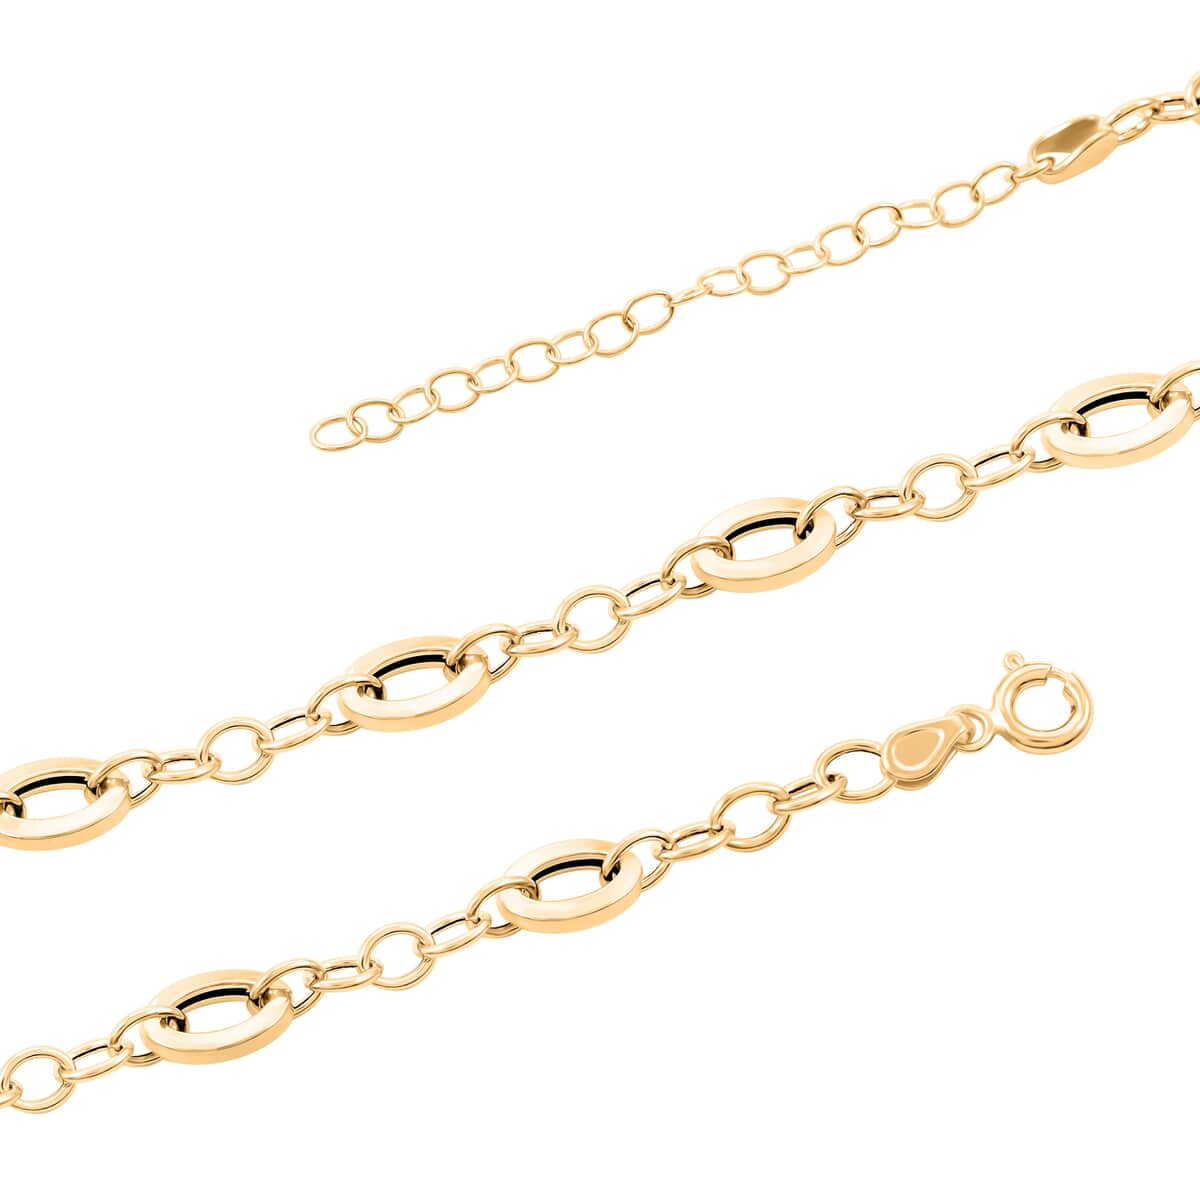 Preziosa Italian 14K Yellow Gold Chain Necklace 18-20 Inches 4.04 Grams image number 2